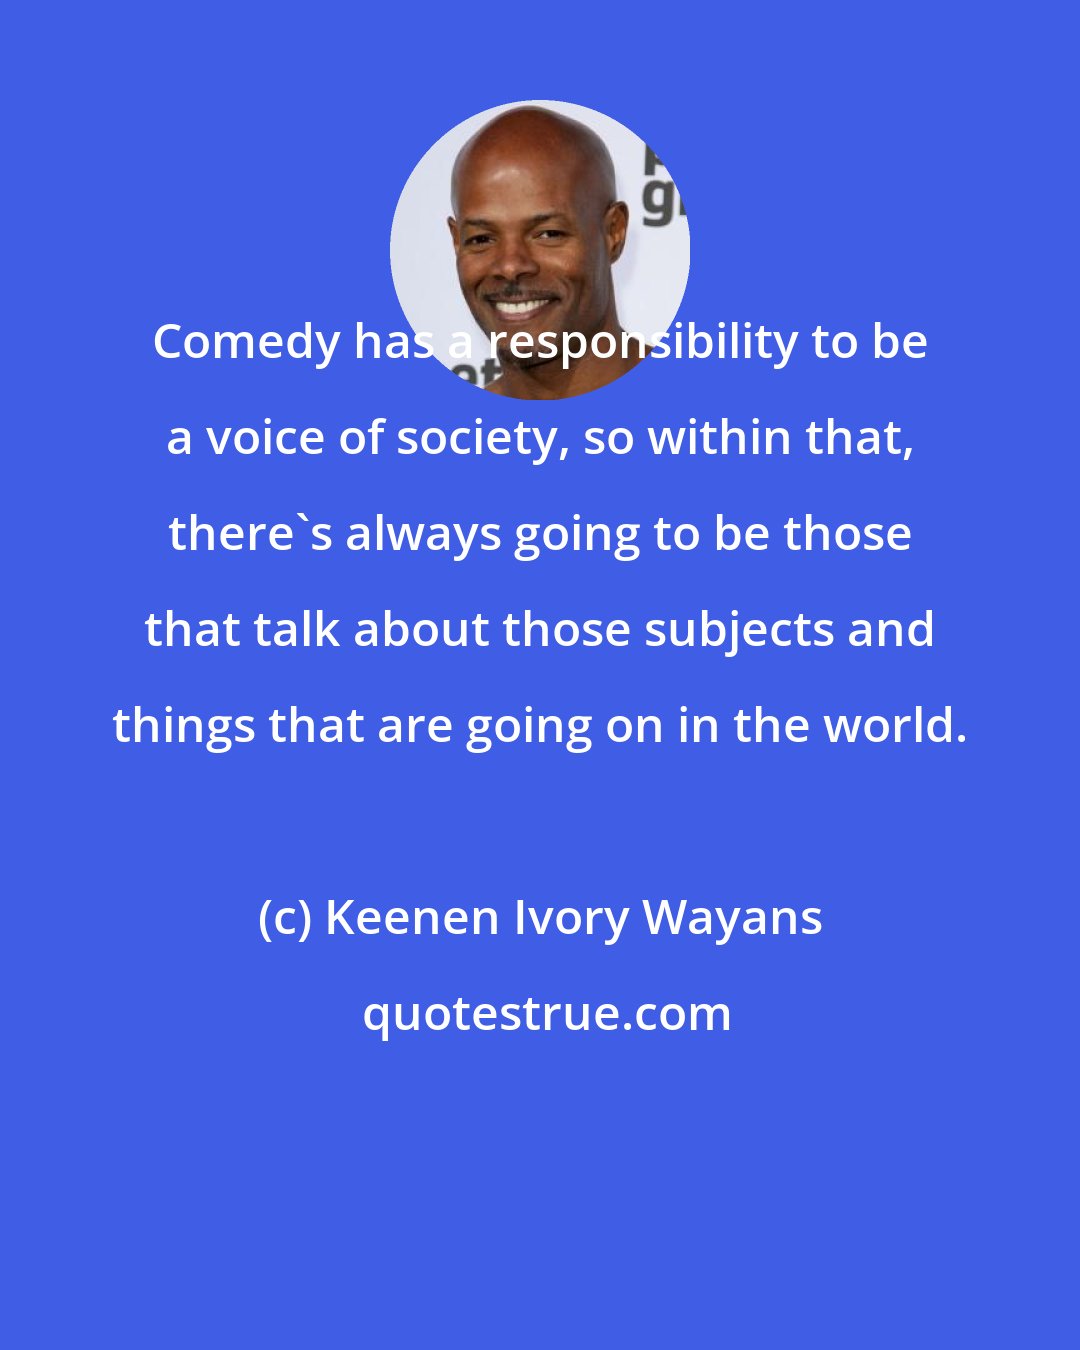 Keenen Ivory Wayans: Comedy has a responsibility to be a voice of society, so within that, there's always going to be those that talk about those subjects and things that are going on in the world.